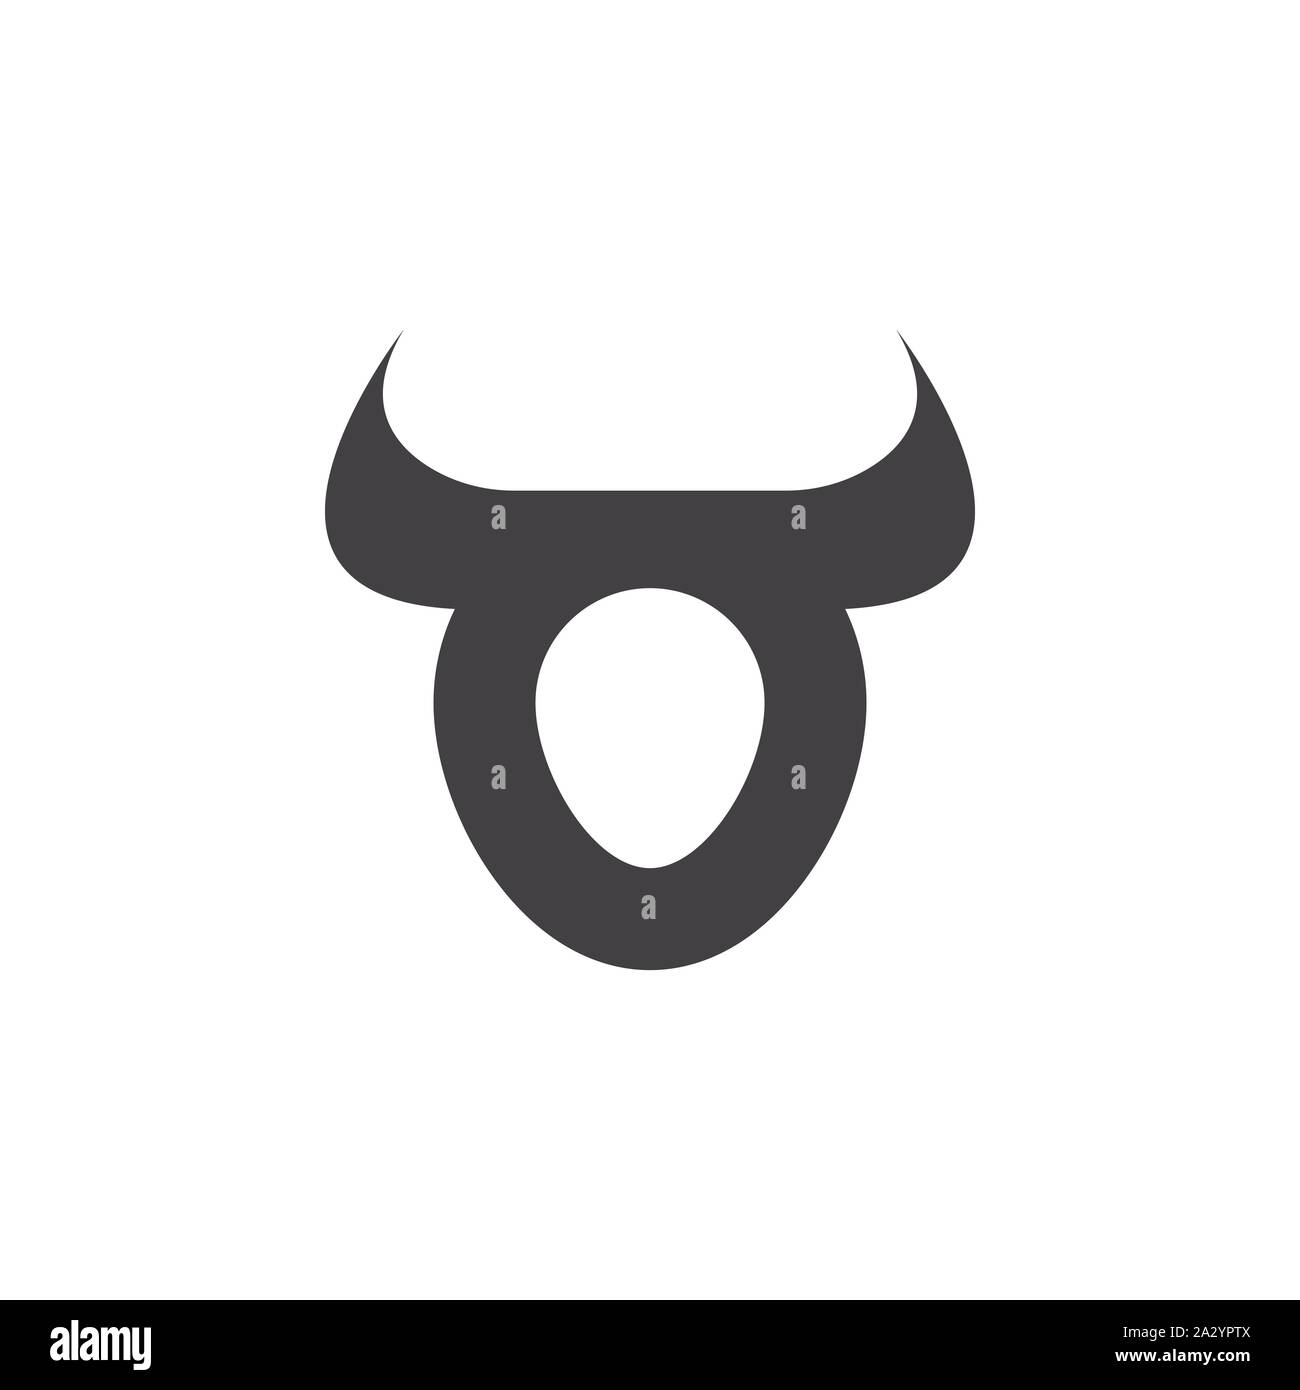 Taurus graphic design template vector isolated illustration Stock Vector